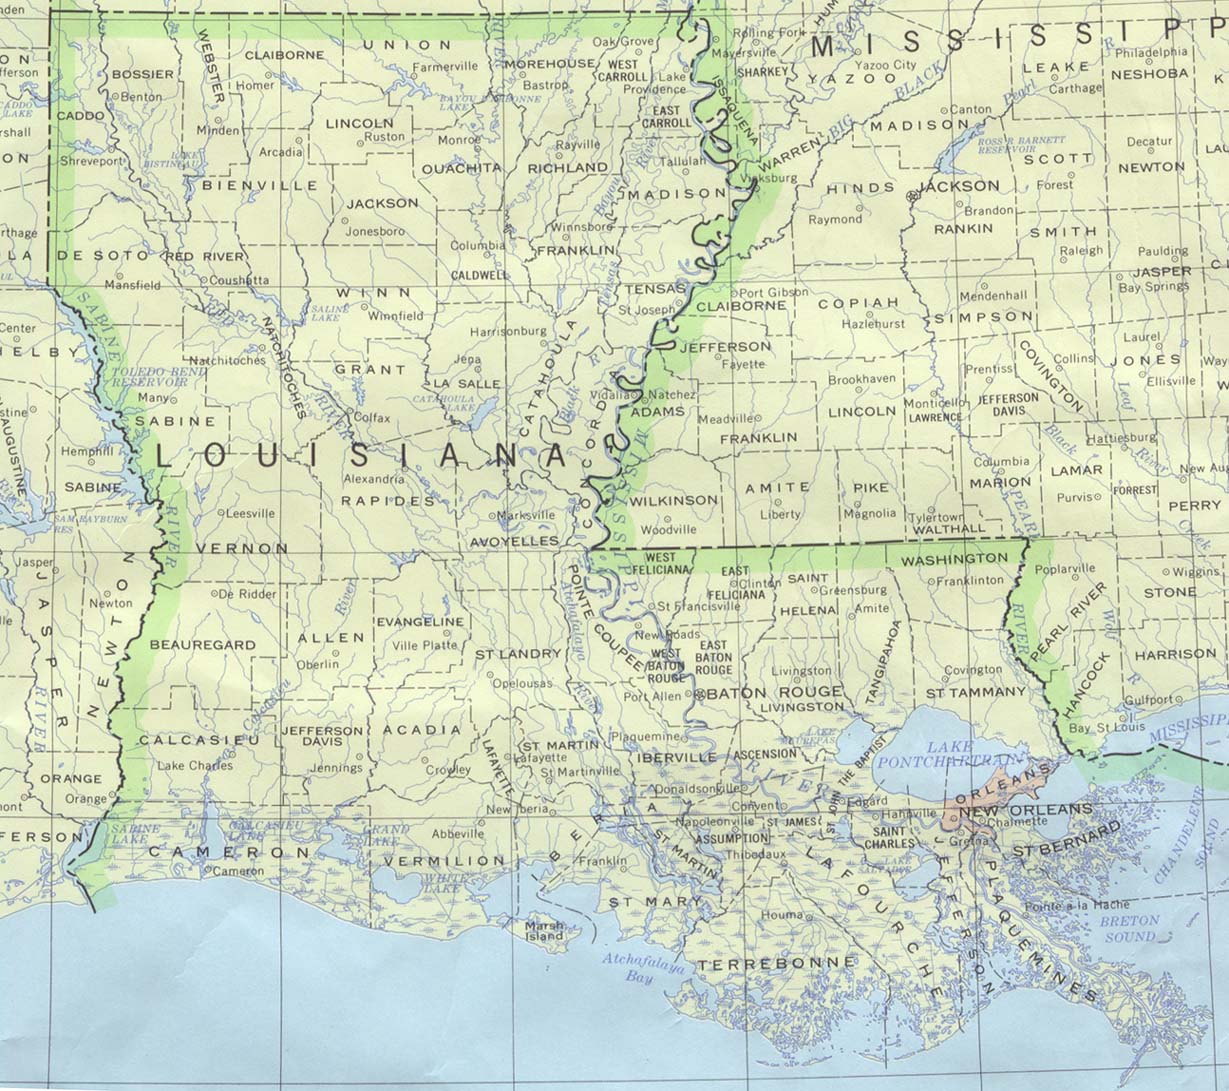 Louisiana Maps - Perry-Castañeda Map Collection - UT Library Online